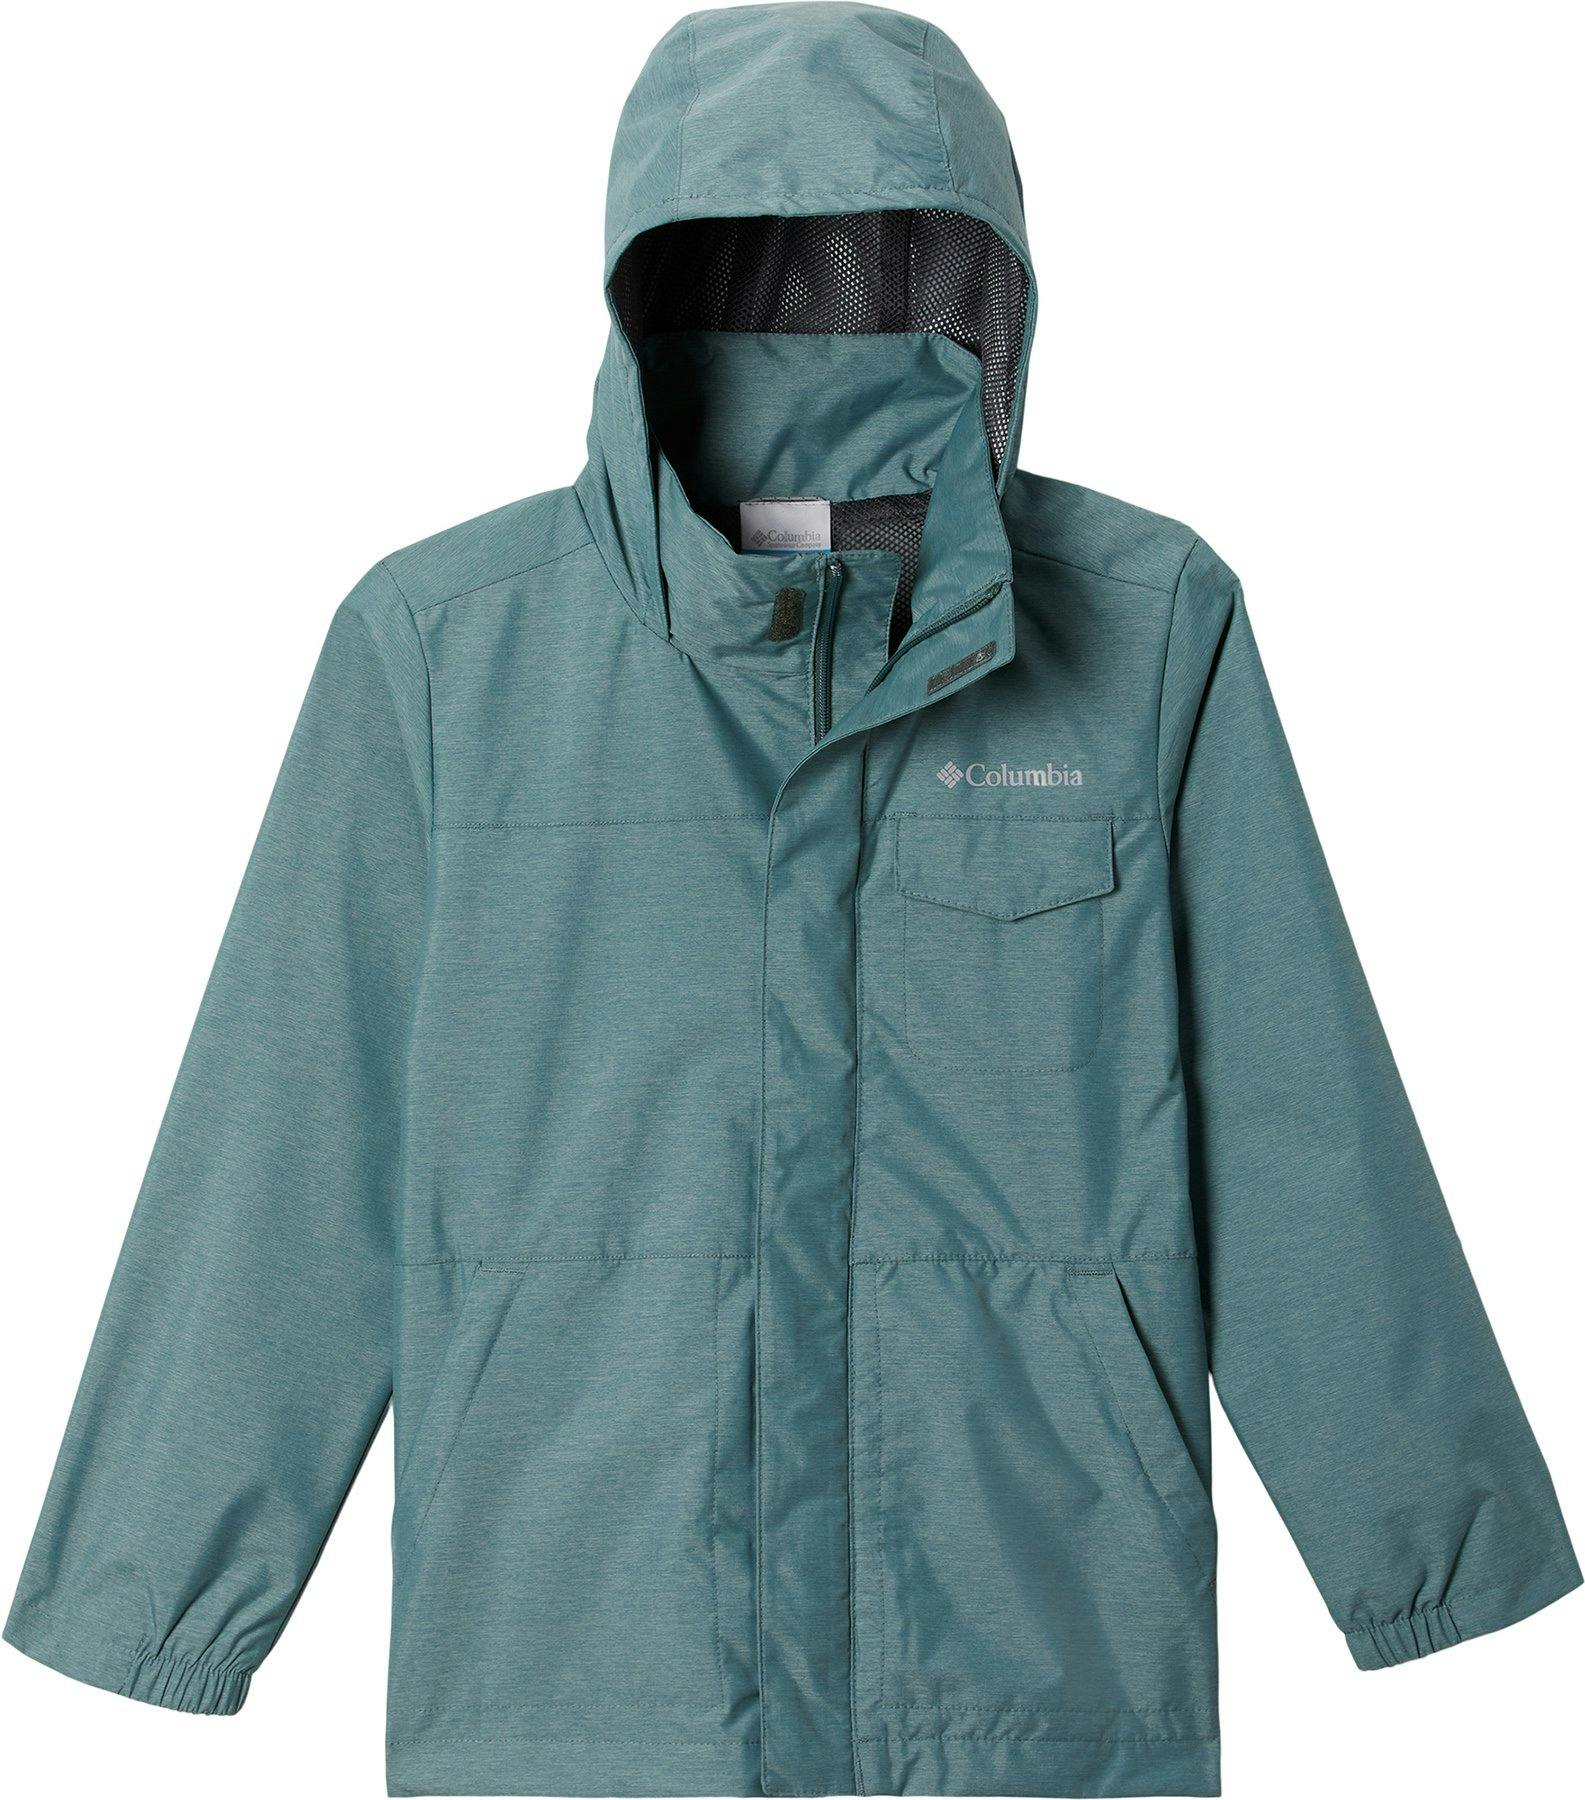 Product image for Static Ridge Field Jacket - Boy's